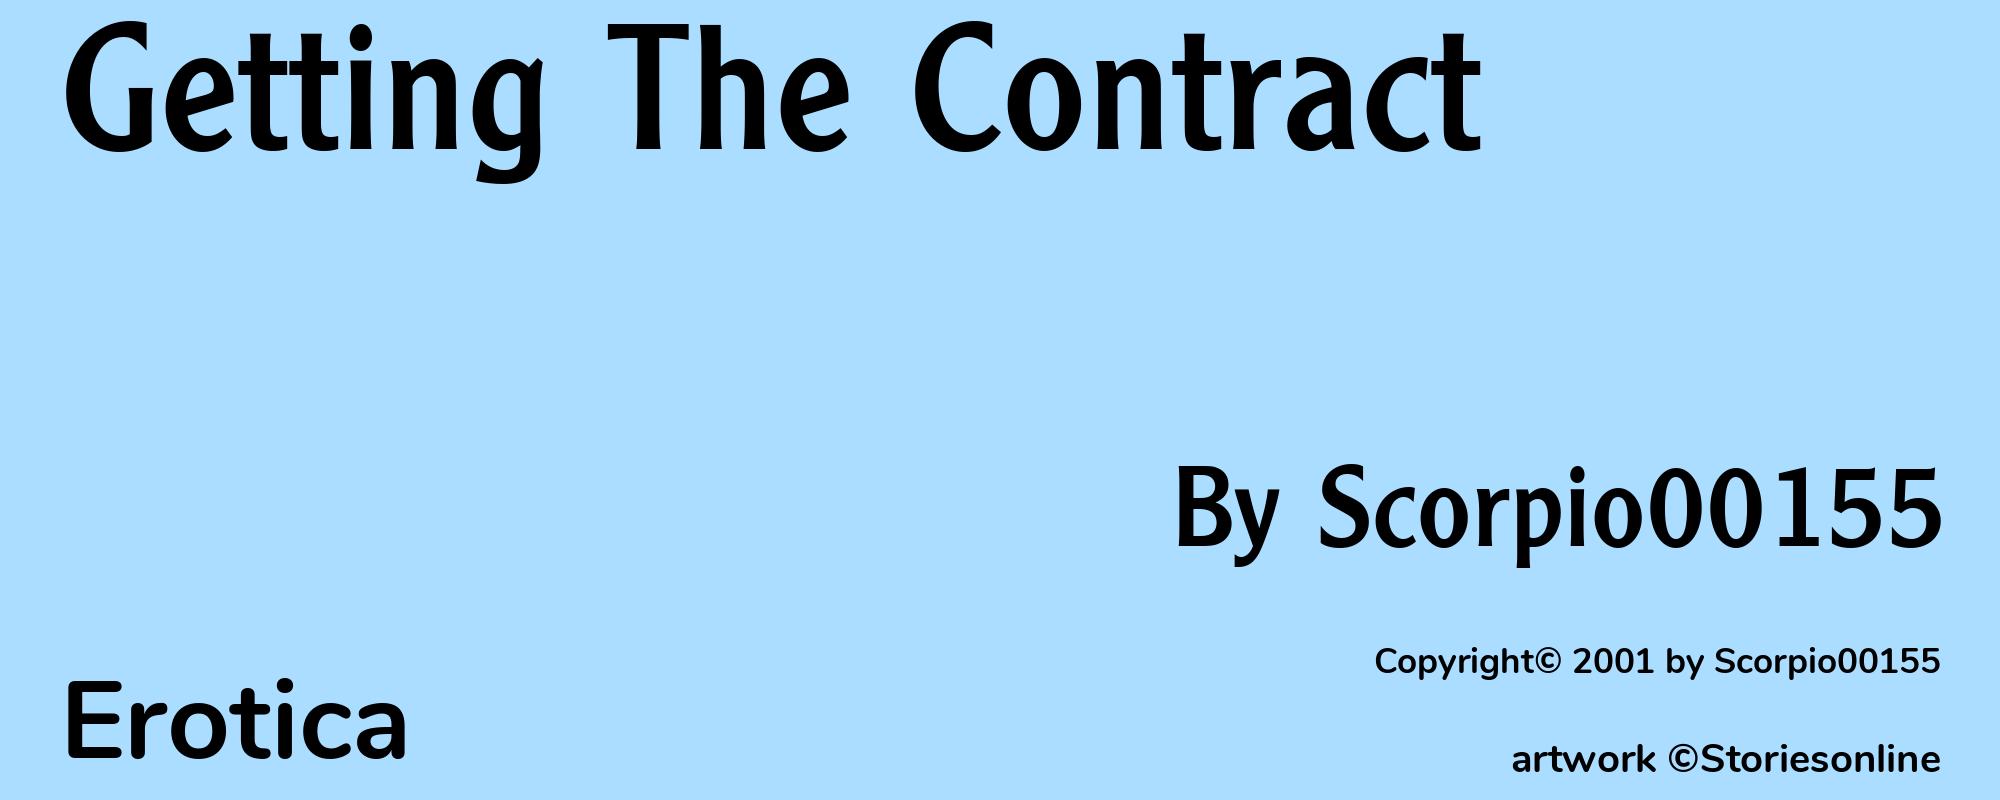 Getting The Contract - Cover